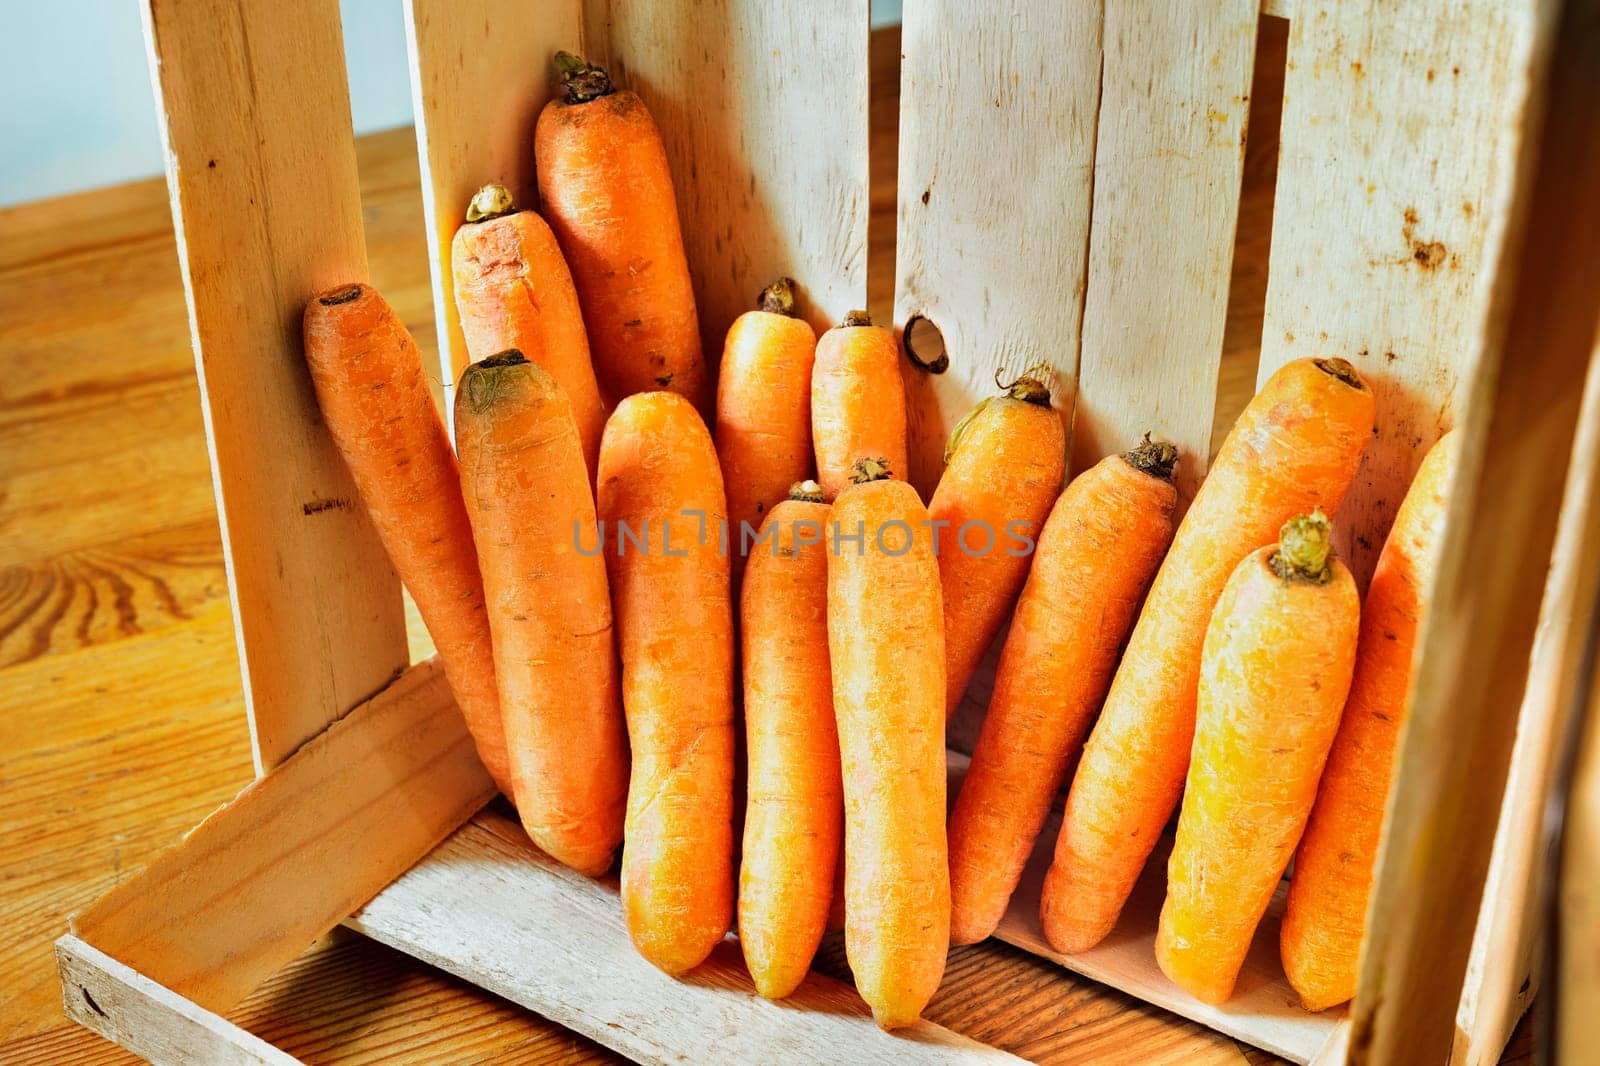 Bunch of orange carrots in wooden box on wooden table ready for cooking or selling